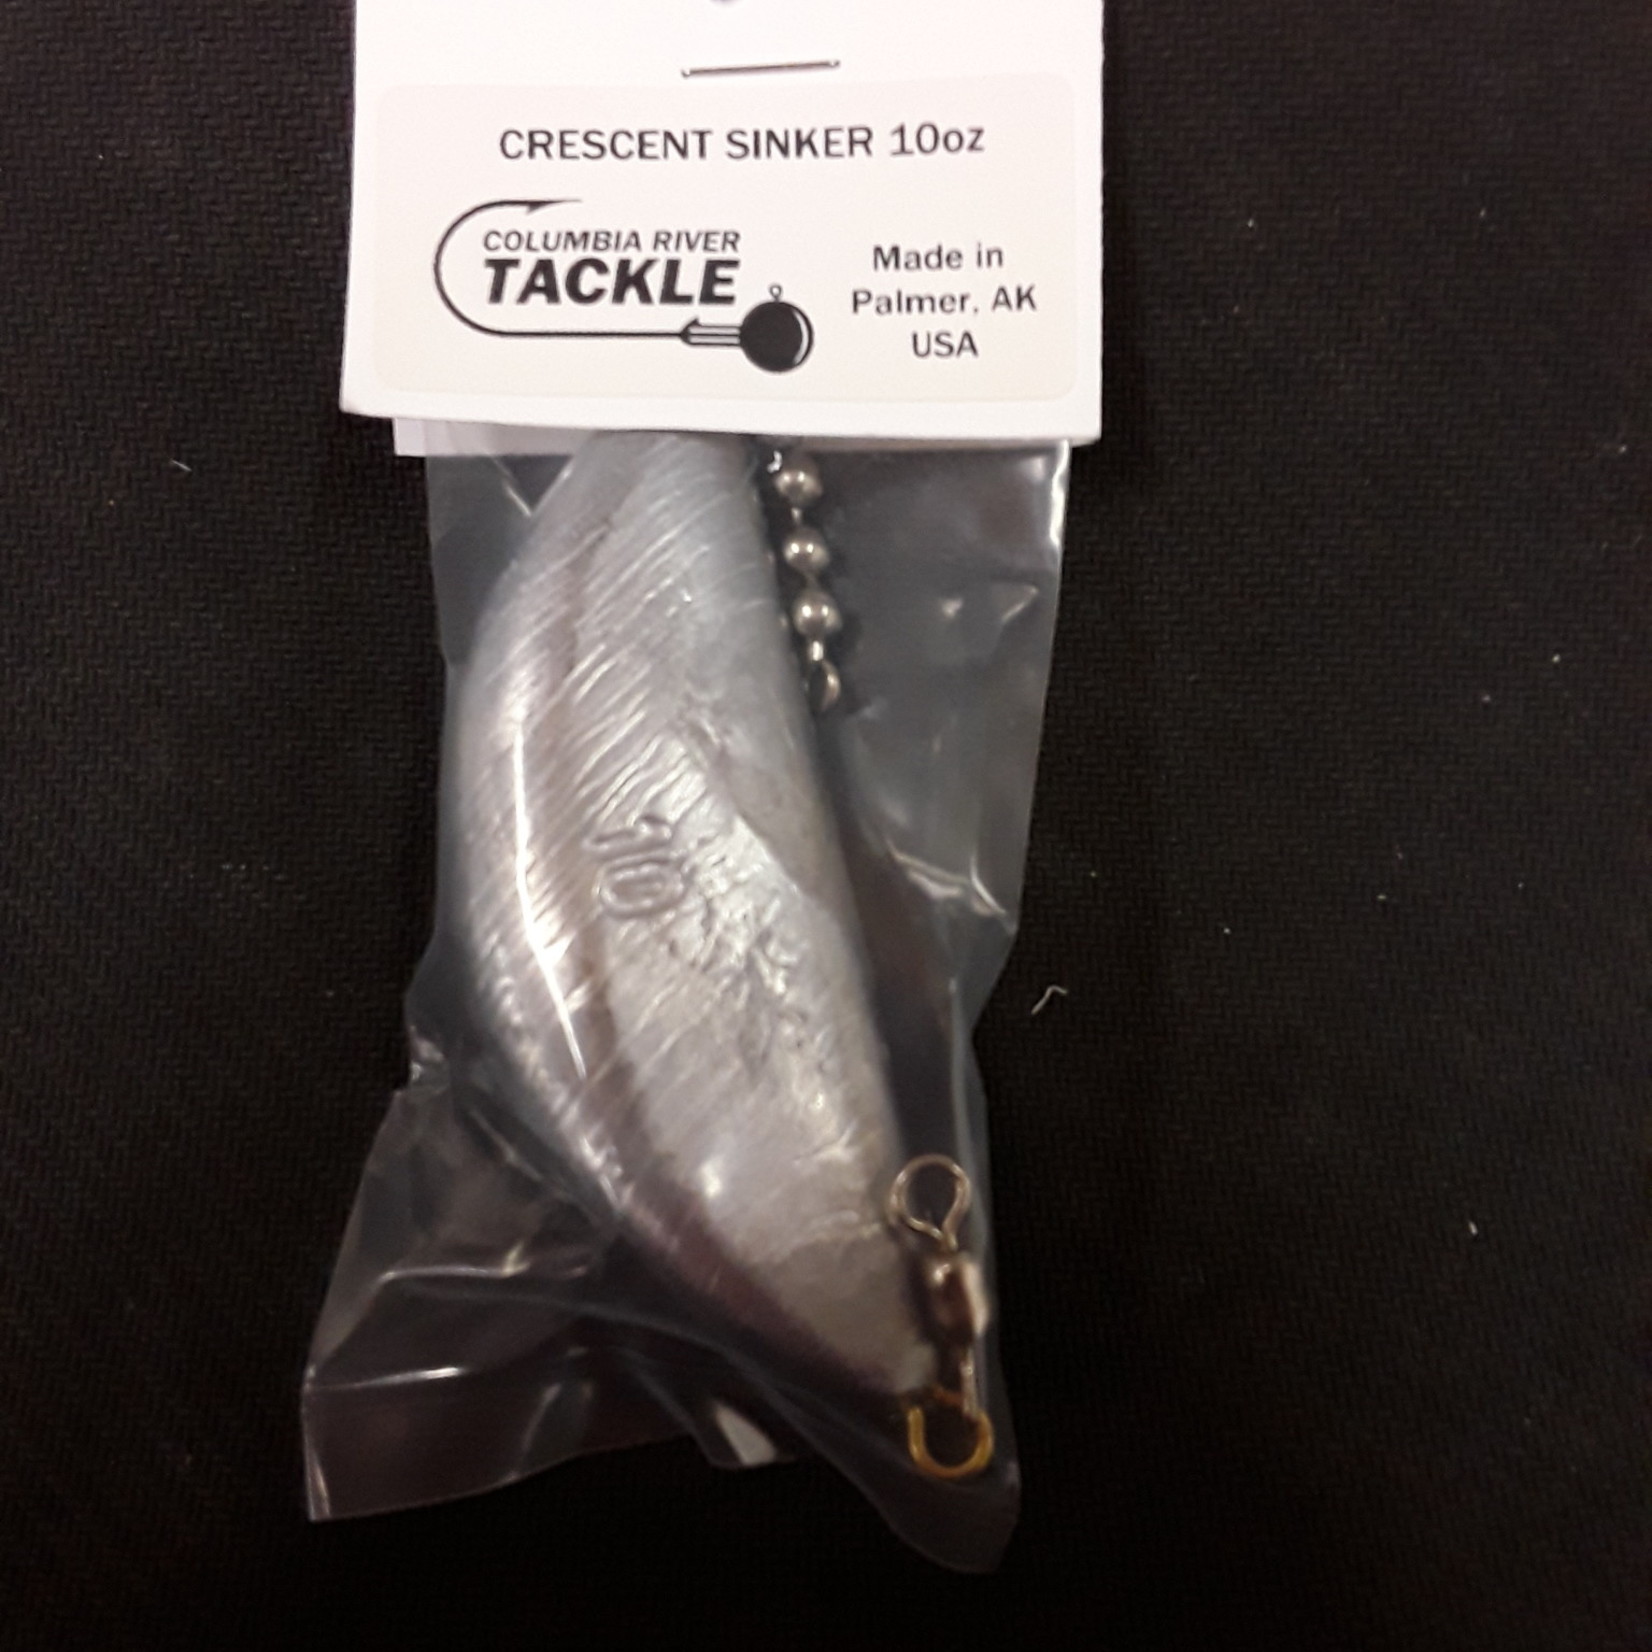 Columbia River Tackle Columbia River Crescent Sinker 10 oz 1 pack